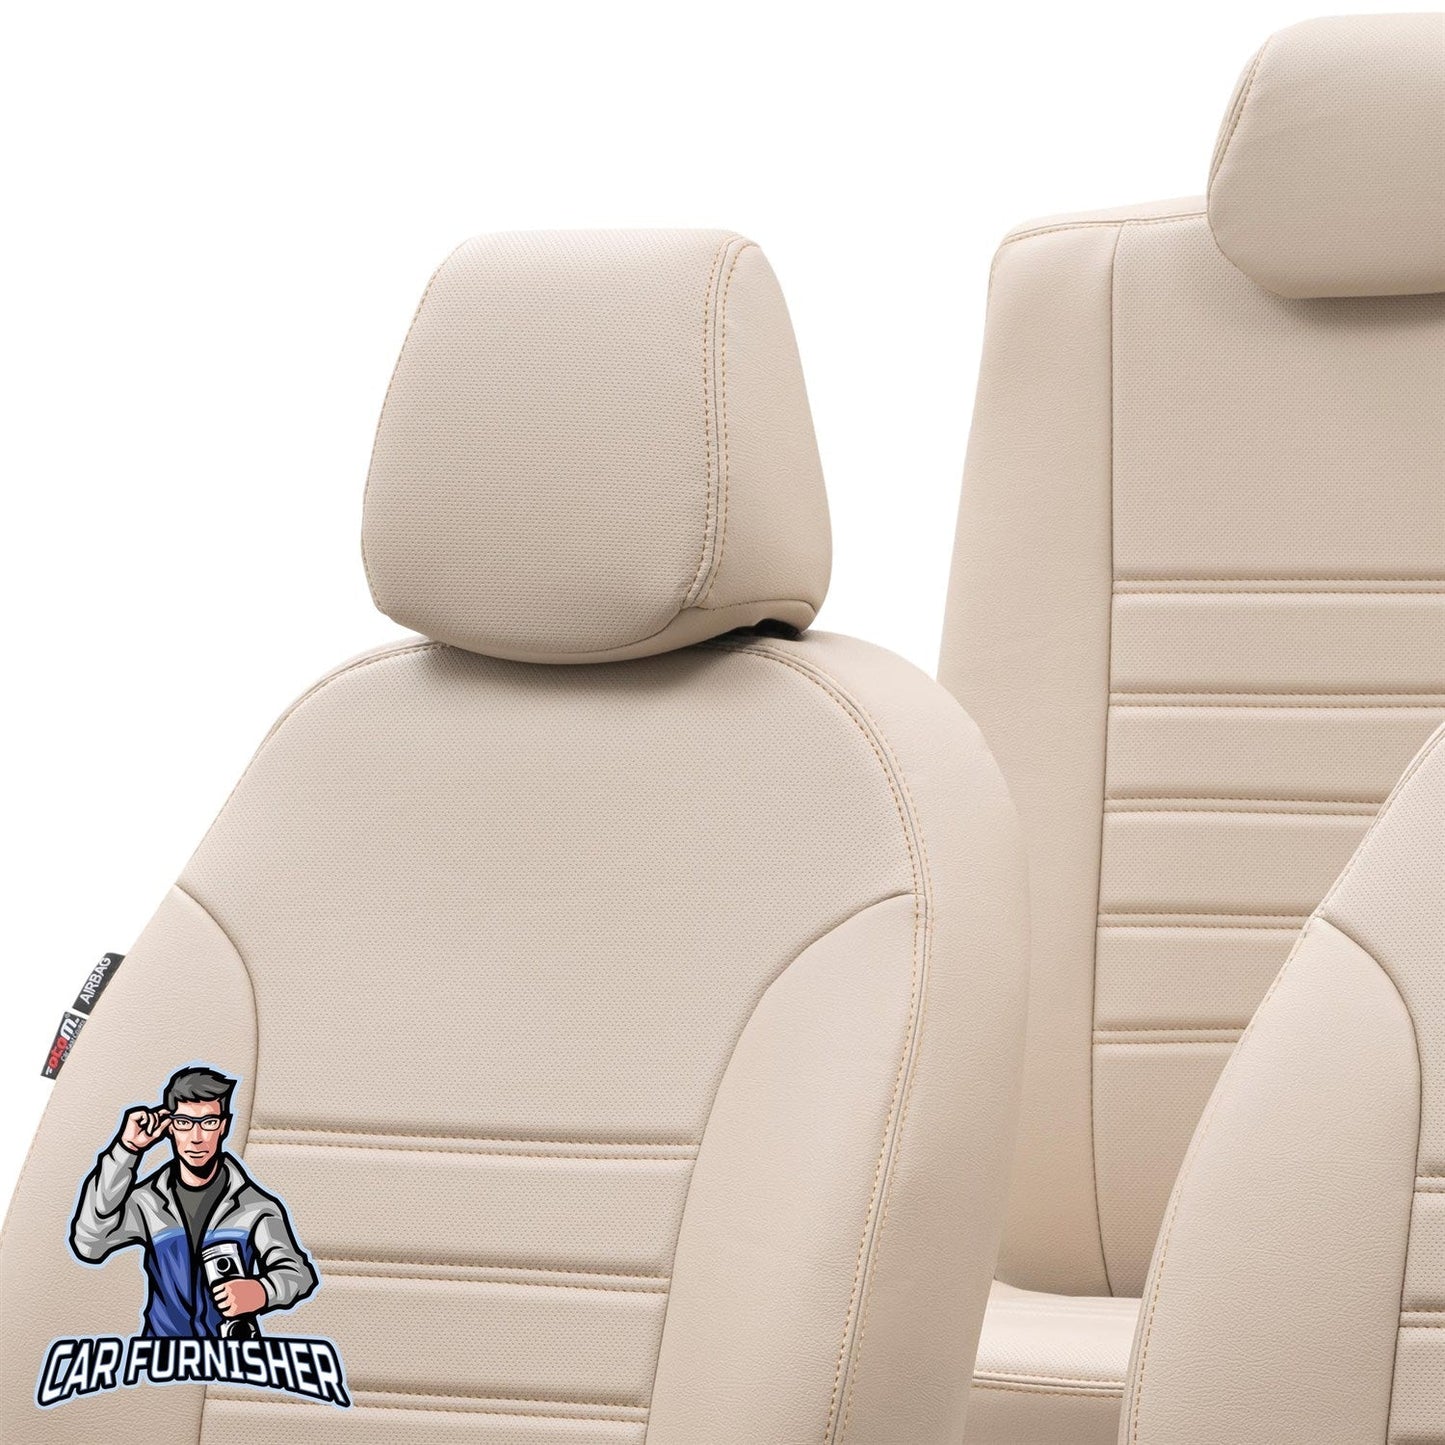 Proton Gen-2 Seat Covers Istanbul Leather Design Beige Leather